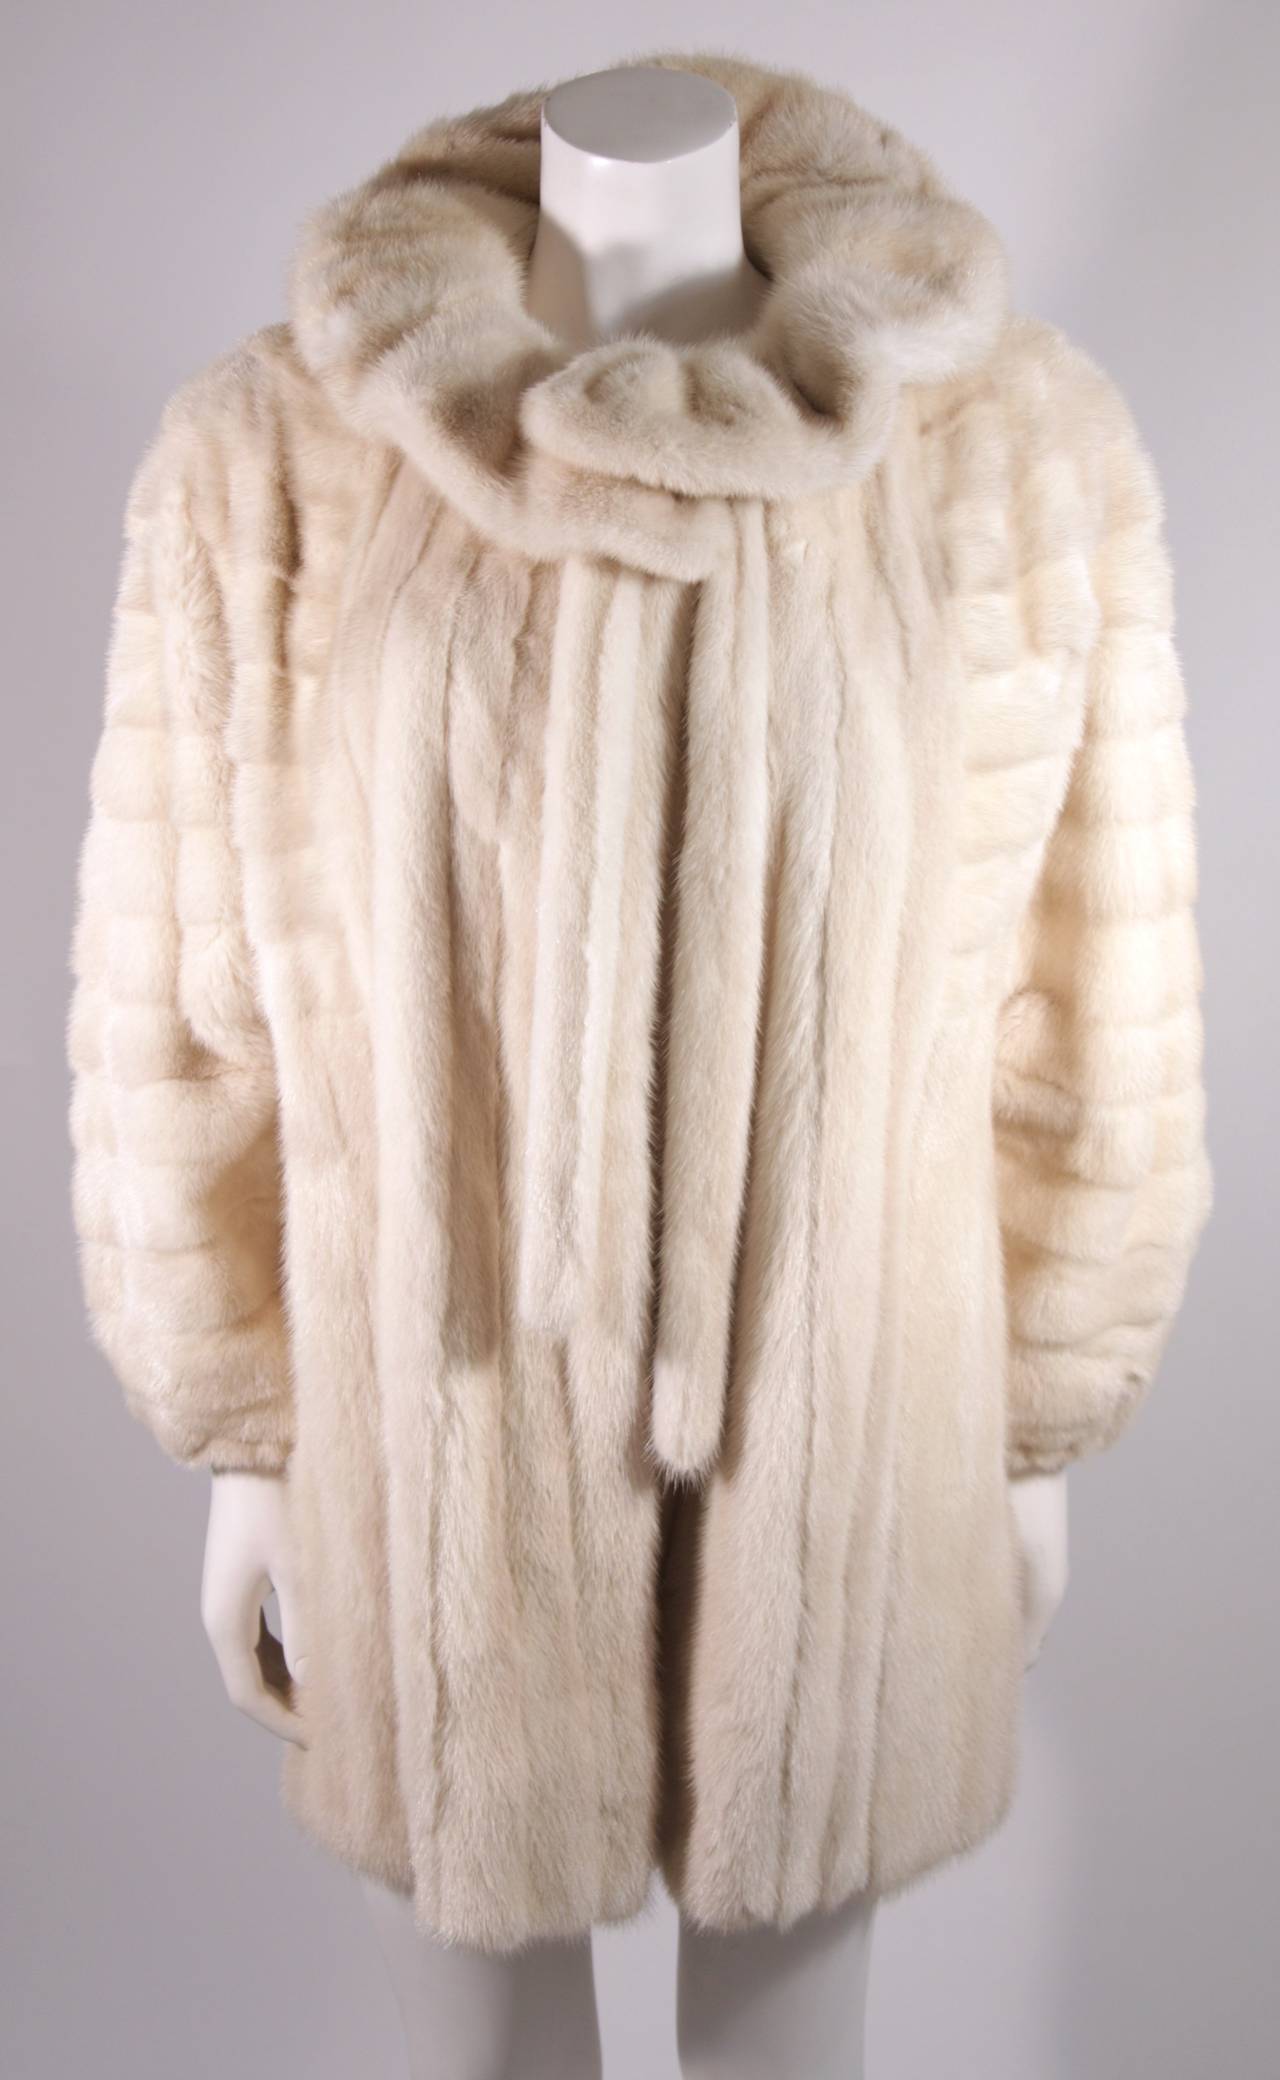 This is a delectable Galanos design. This fur coat is composed of an off white, Ivory hued mink. A great design which features a generous yet perfectly cut sleeve with a stretch cuff (to insulate) . A wonderful ruffle collar which can be worn up or